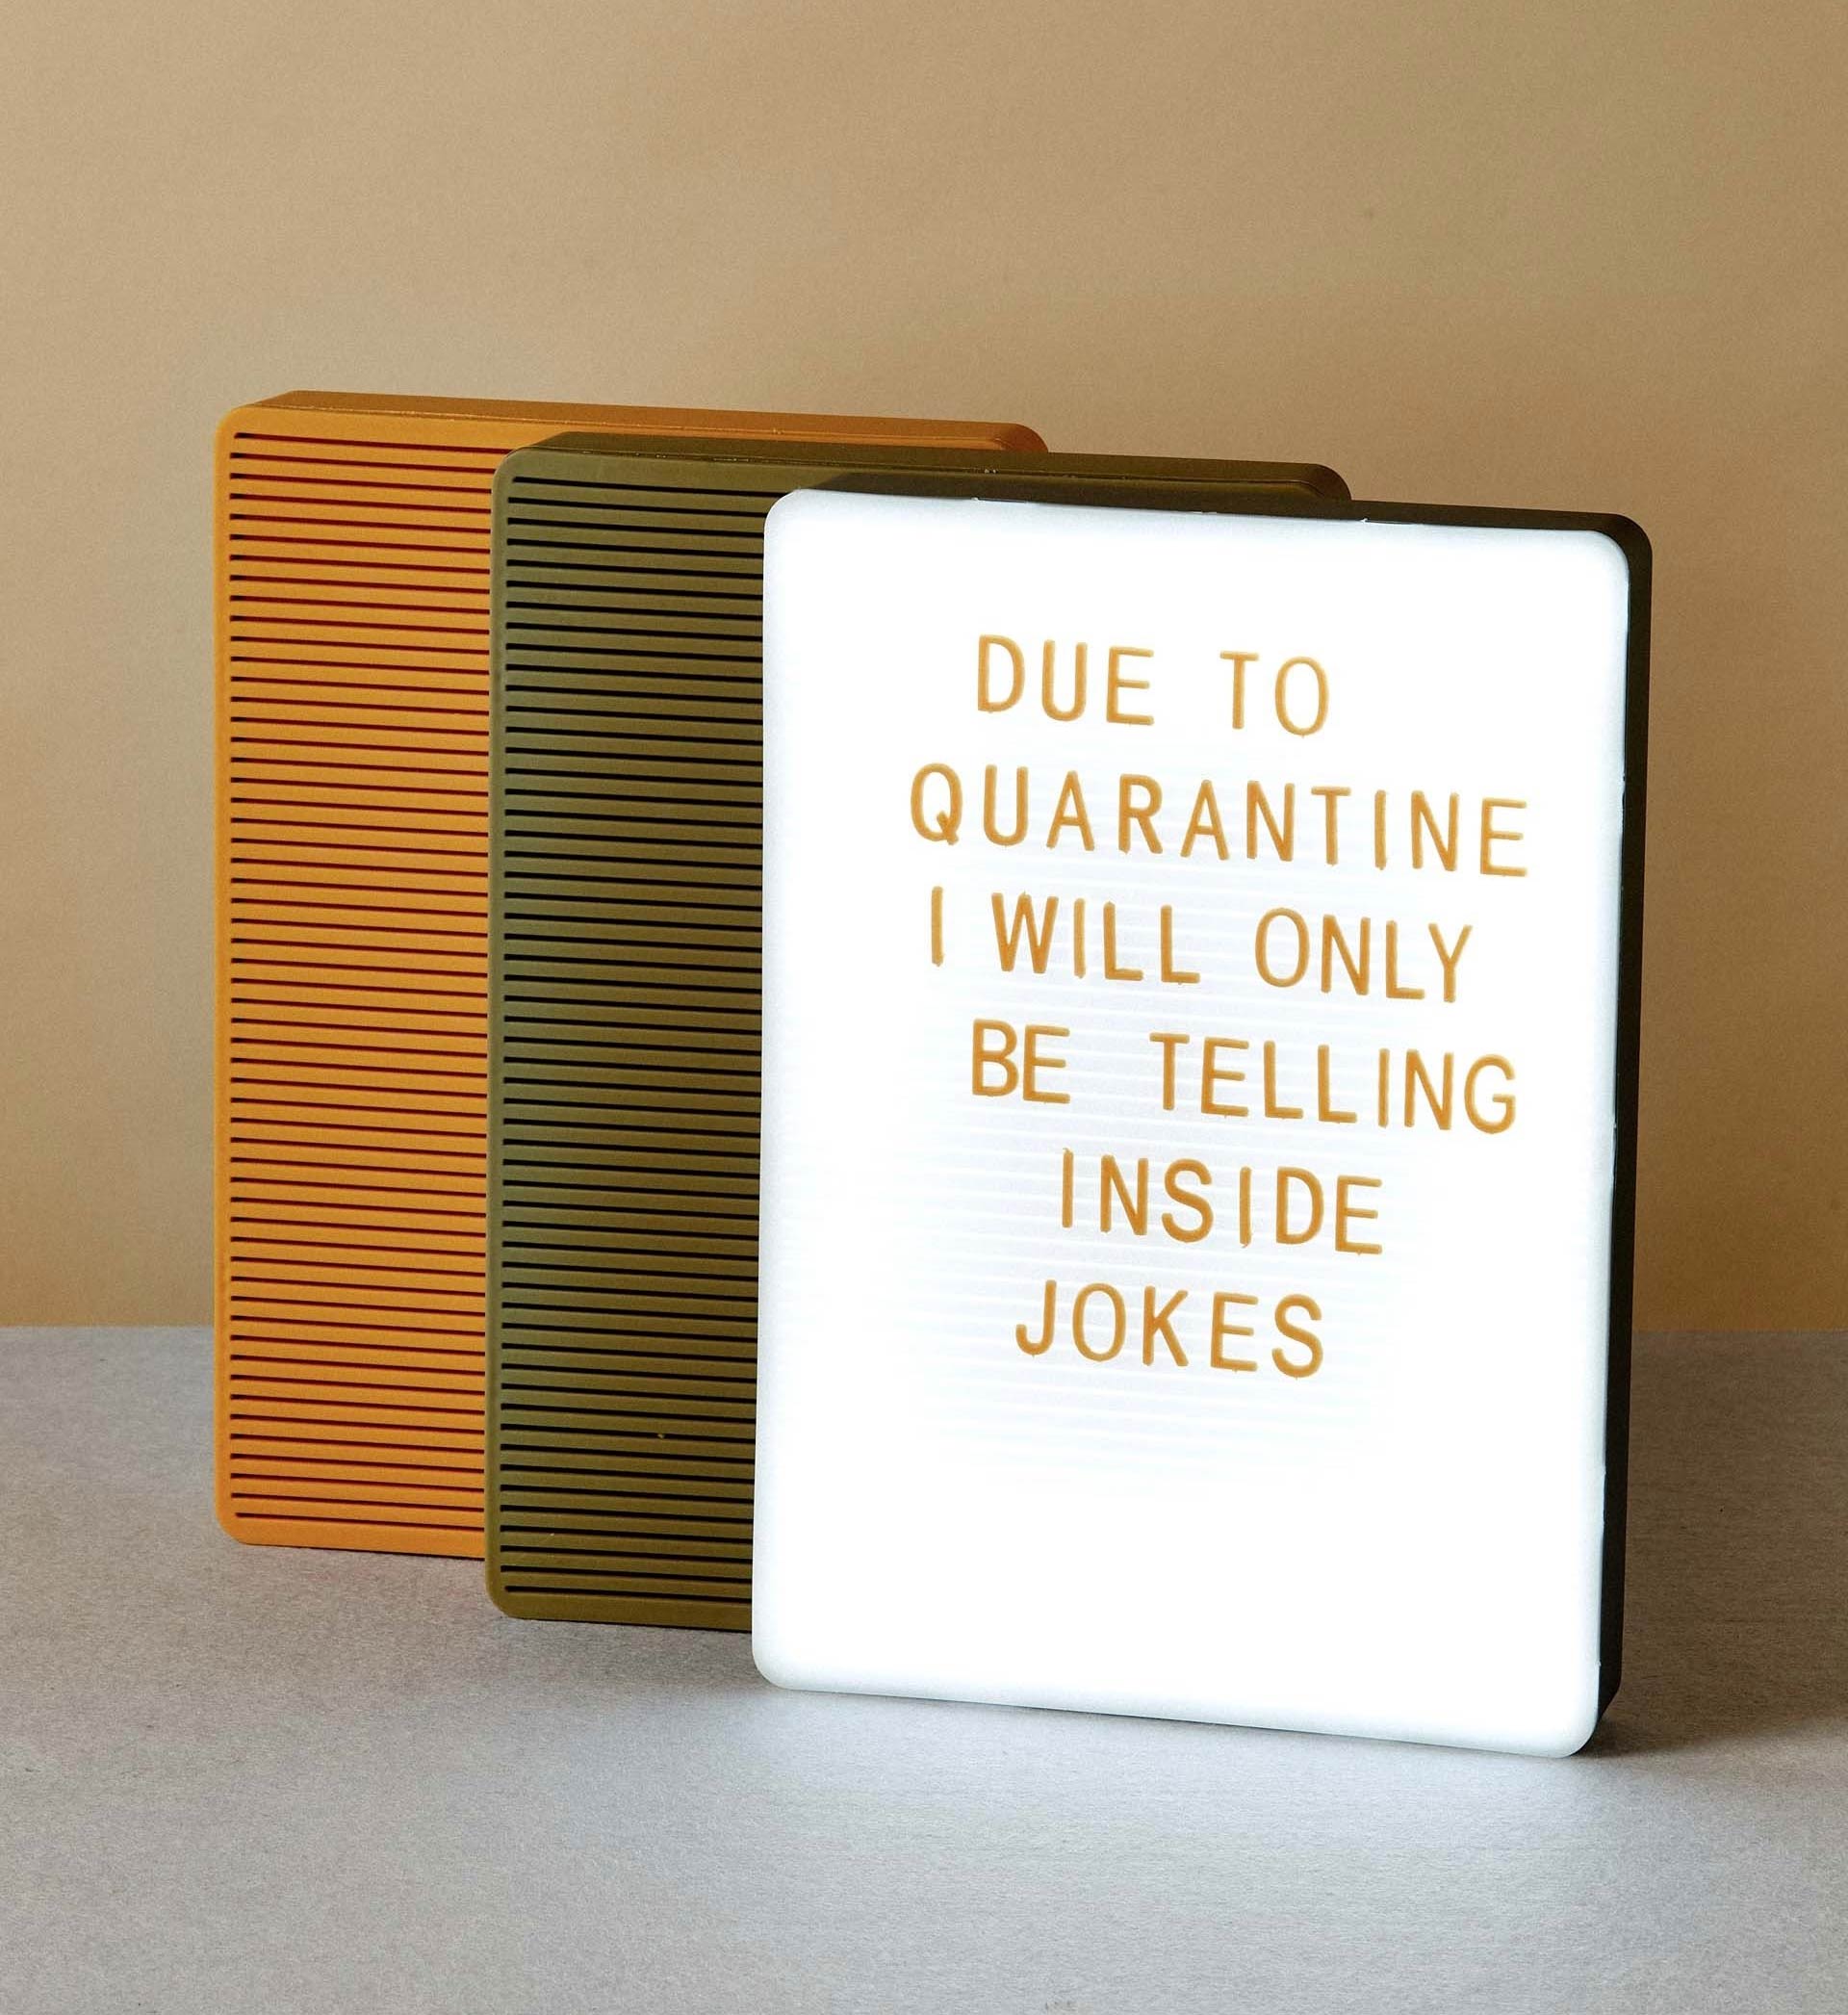 Photo of a pegboard sign that reads in orange removable characters “DUE TO QUARANTINE I WILL ONLY BE TELLING INSIDE JOKES” with two other closed green and orange signs behind it.